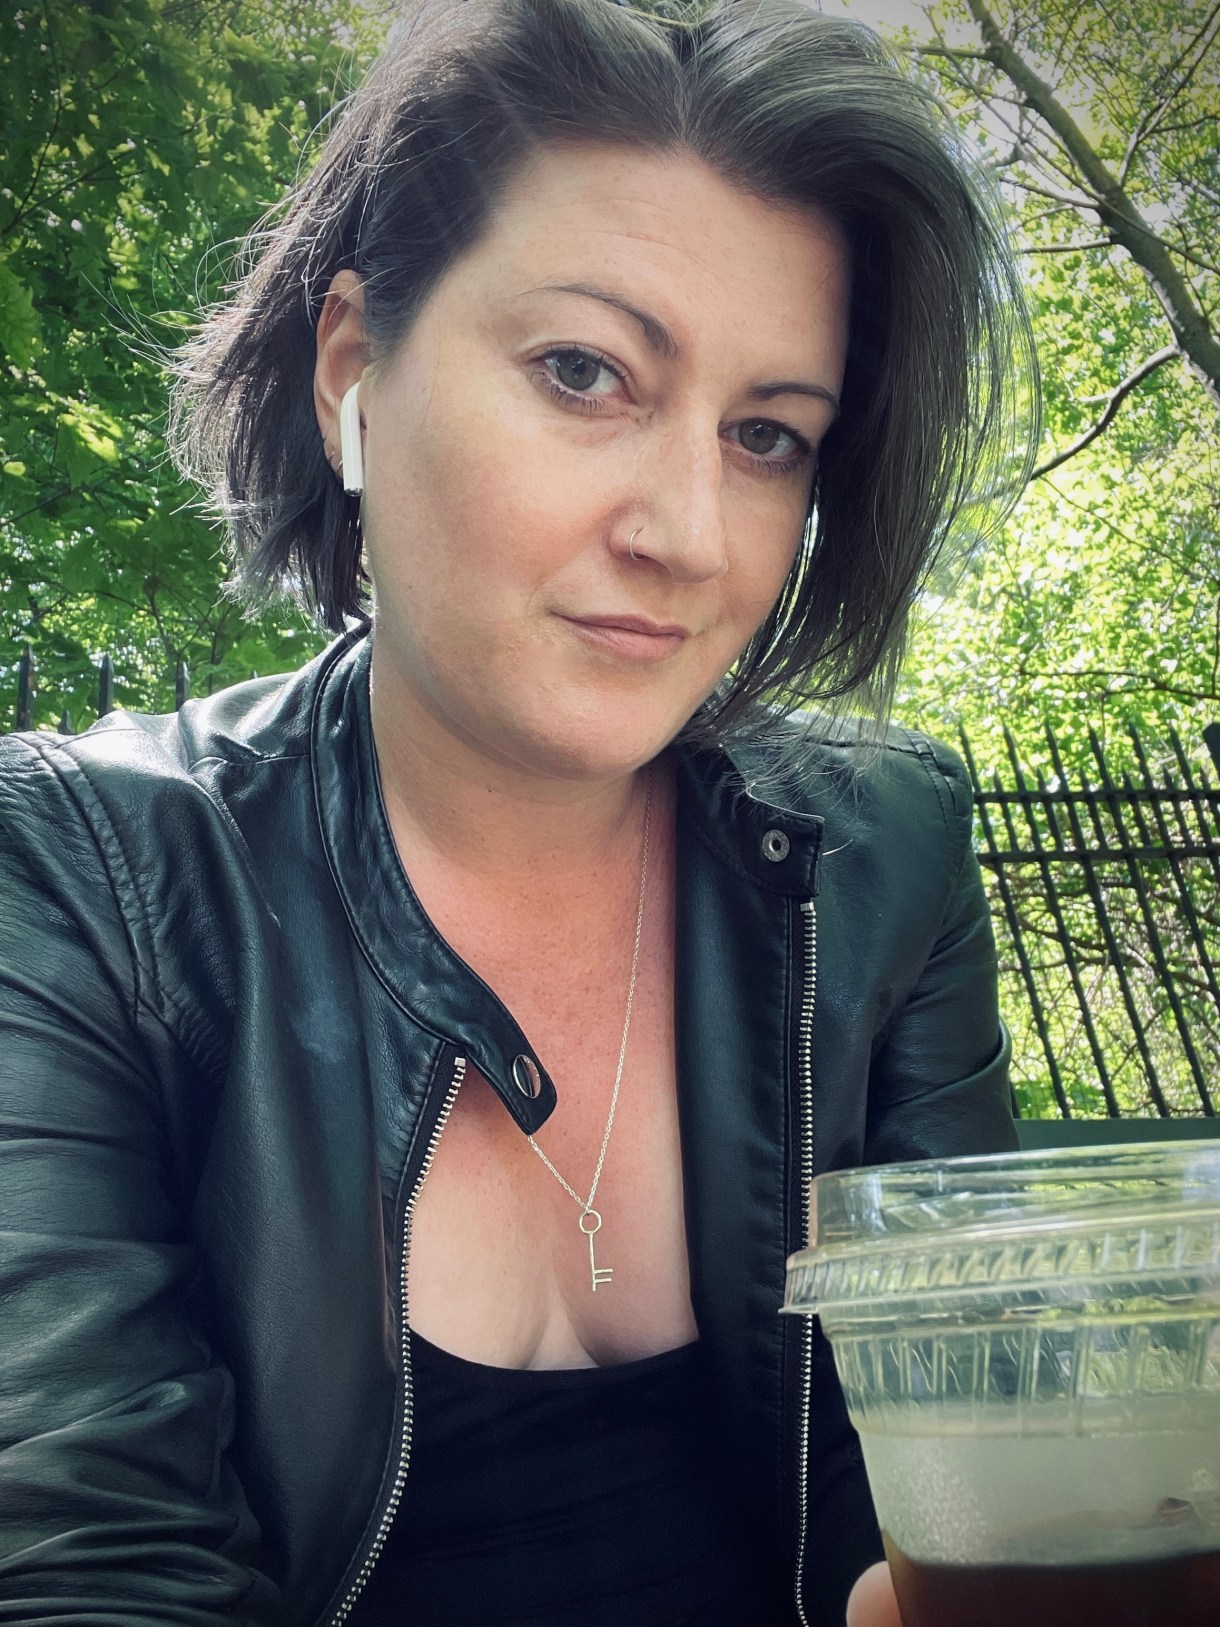 Meg, a white woman with gray hair, wears a black leather jacket and holds a cold beverage outdoors